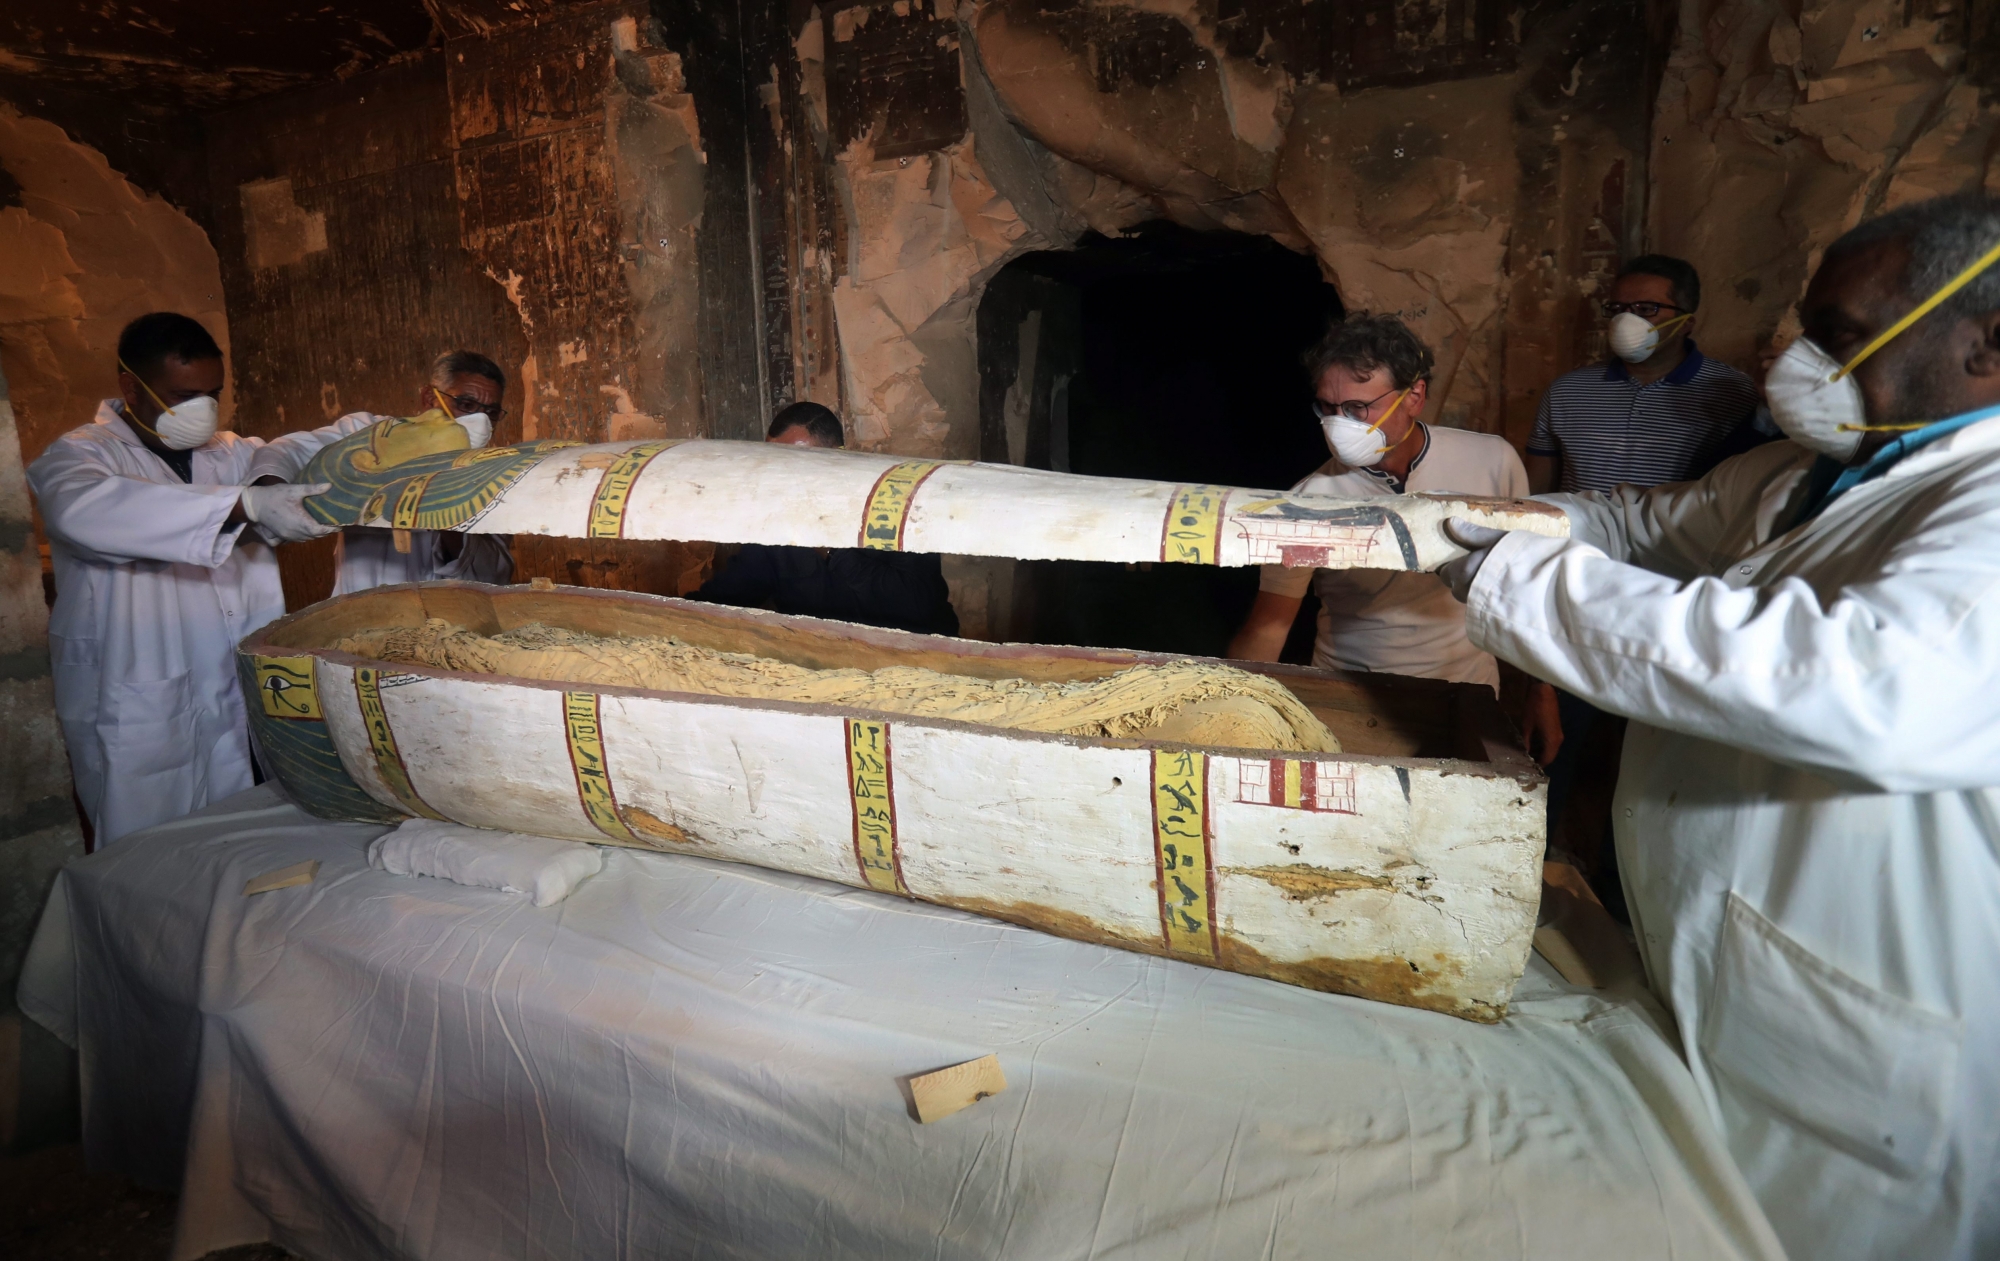 epa07186564 Egyptian archaeologists move the cover of an intact sarcophagus, inside Tomb TT33 in Luxor, 700km south of Cairo, Egypt, 24 Novmber 2018. Earlier this month the French mission in Luxor disocvered an intact sarcophagus. The sarcophagus revealed a mummy of a woman called Thuya. French Professor Frederic Colin, head of the French mission in Tomb TT33 where the sarcophagus was found, said that the sarcophagus dates to the 18th dynasty and inside it a well-preserved mummy wrapped in linen was found.  EPA/KHALED  ELFIQI EGYPT ARCHEOLOGY